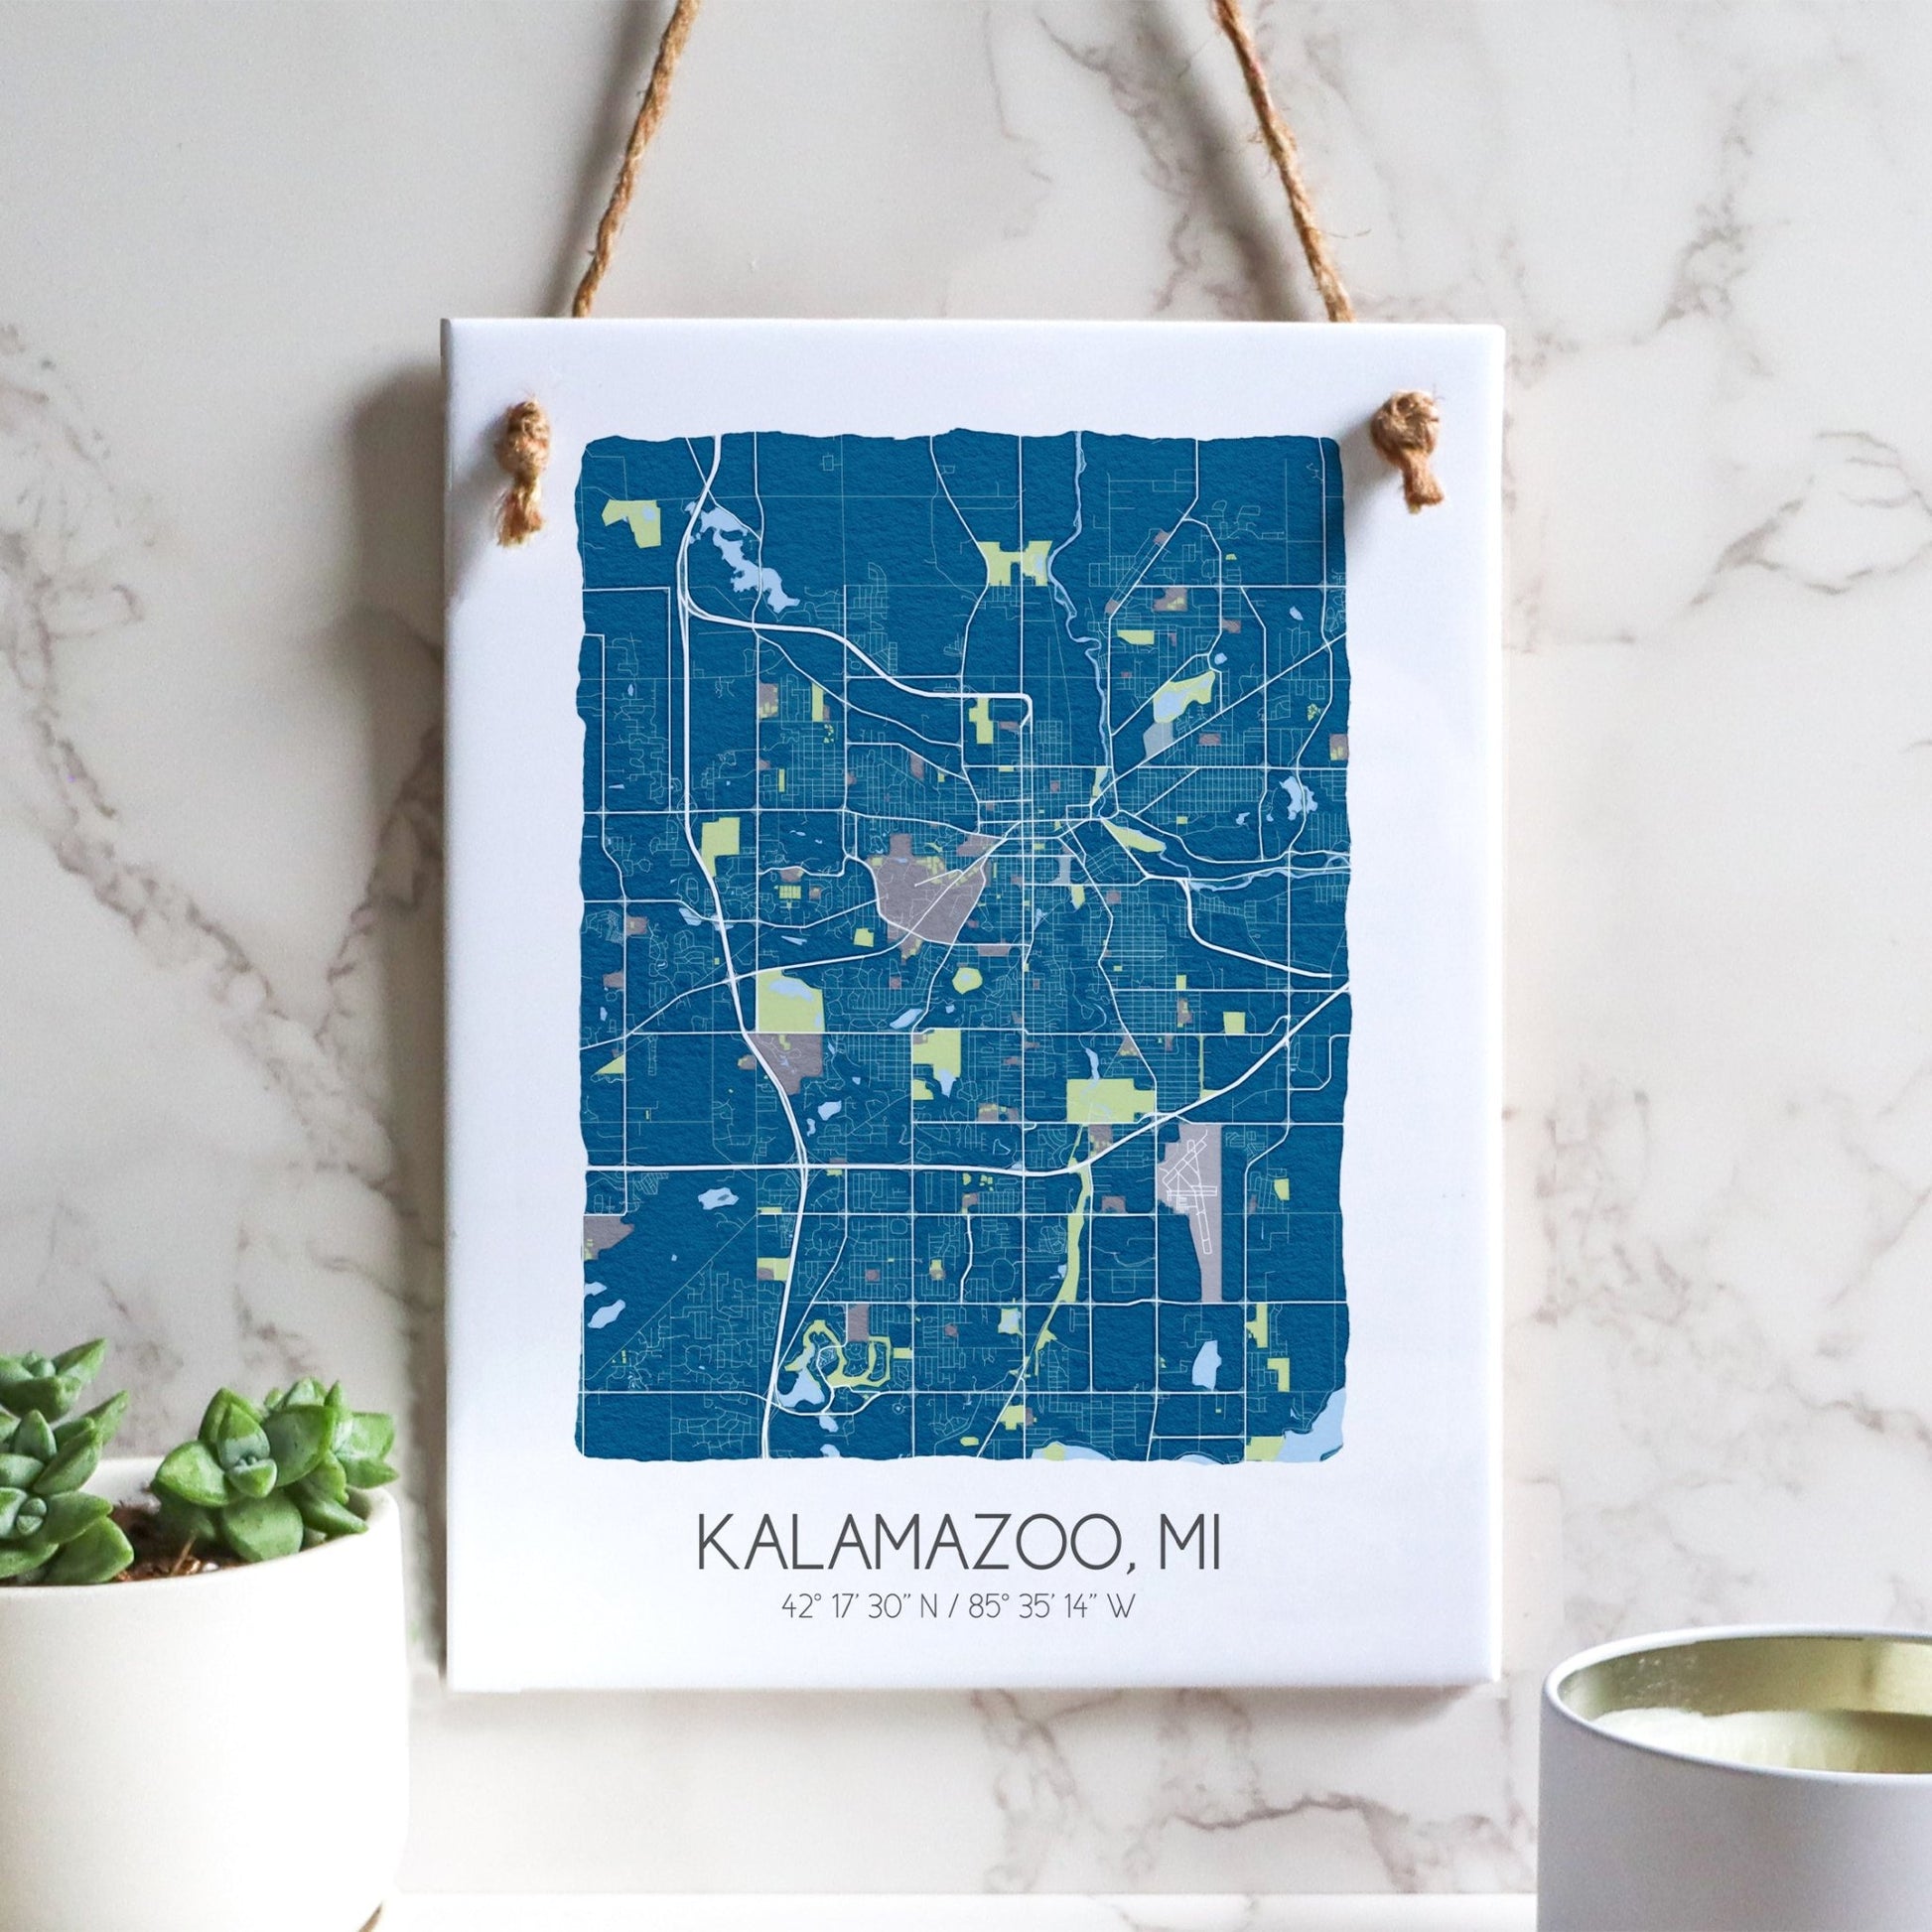 A Kalamazoo MI city map on a ceramic rectangle tile sign hanging on a wall, in blue